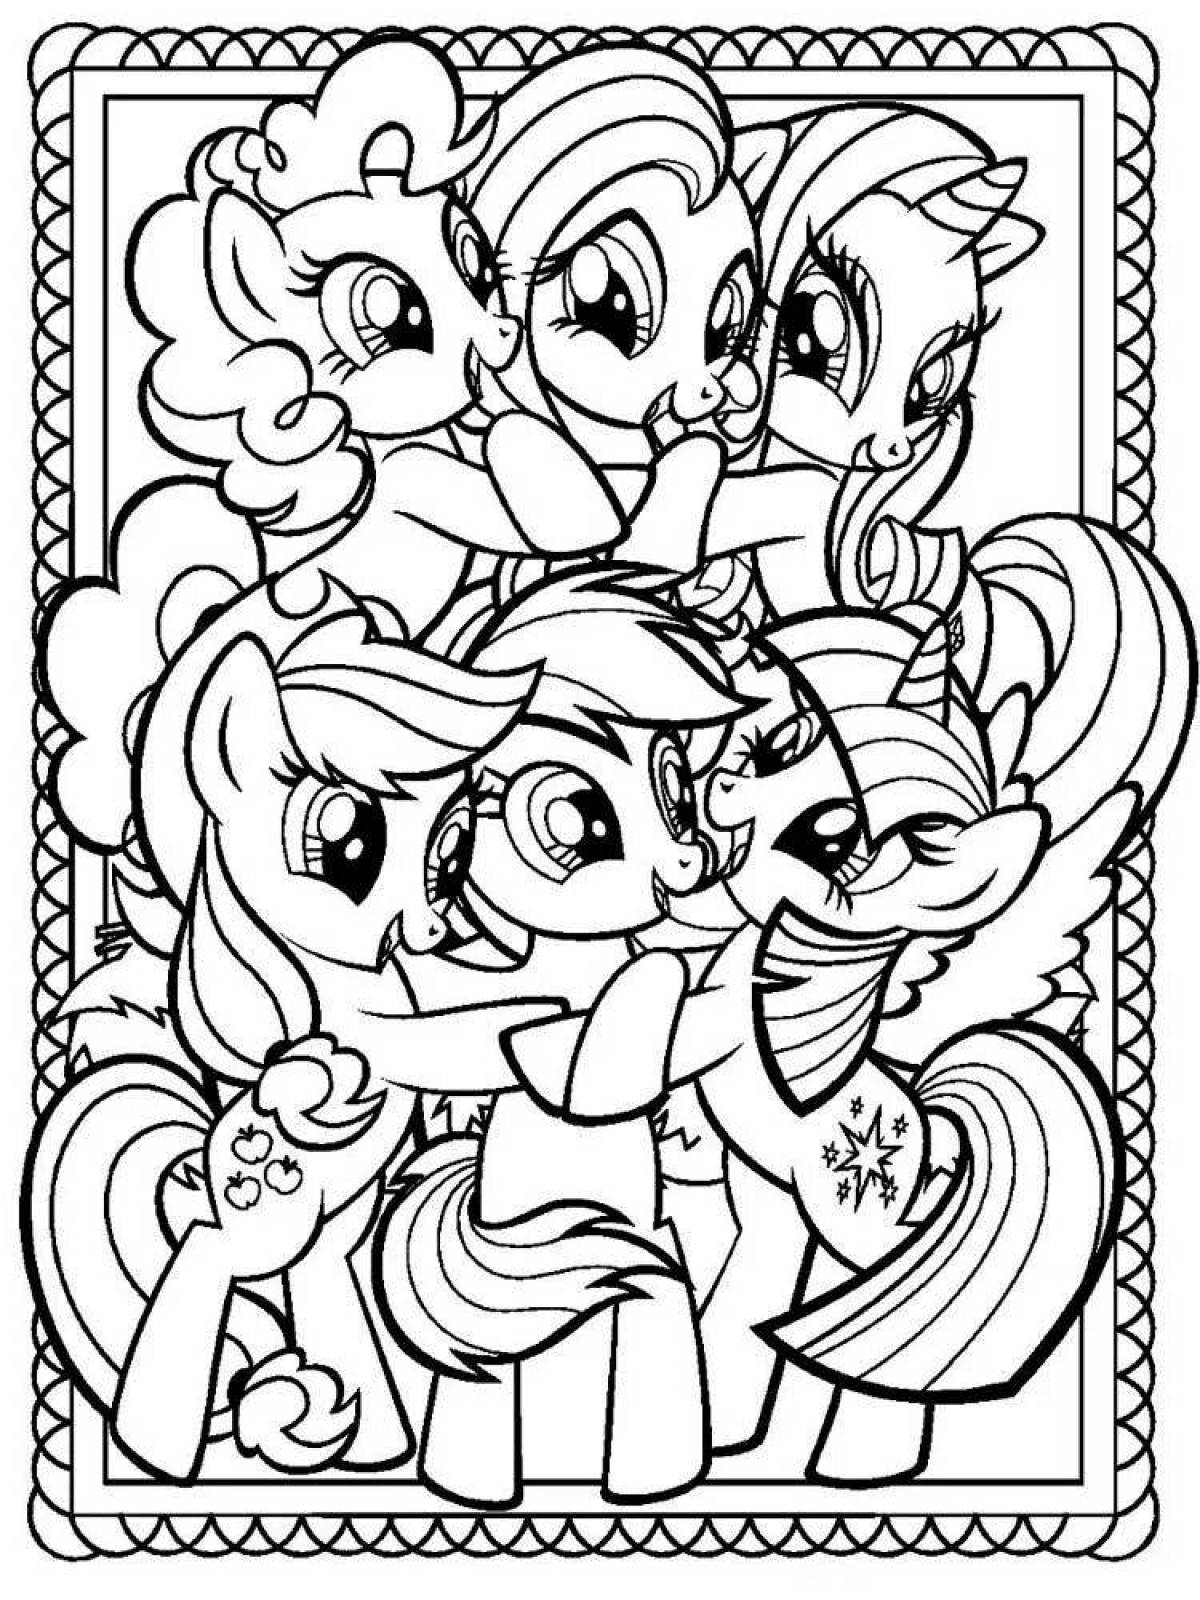 Fancy coloring my little pony all pony